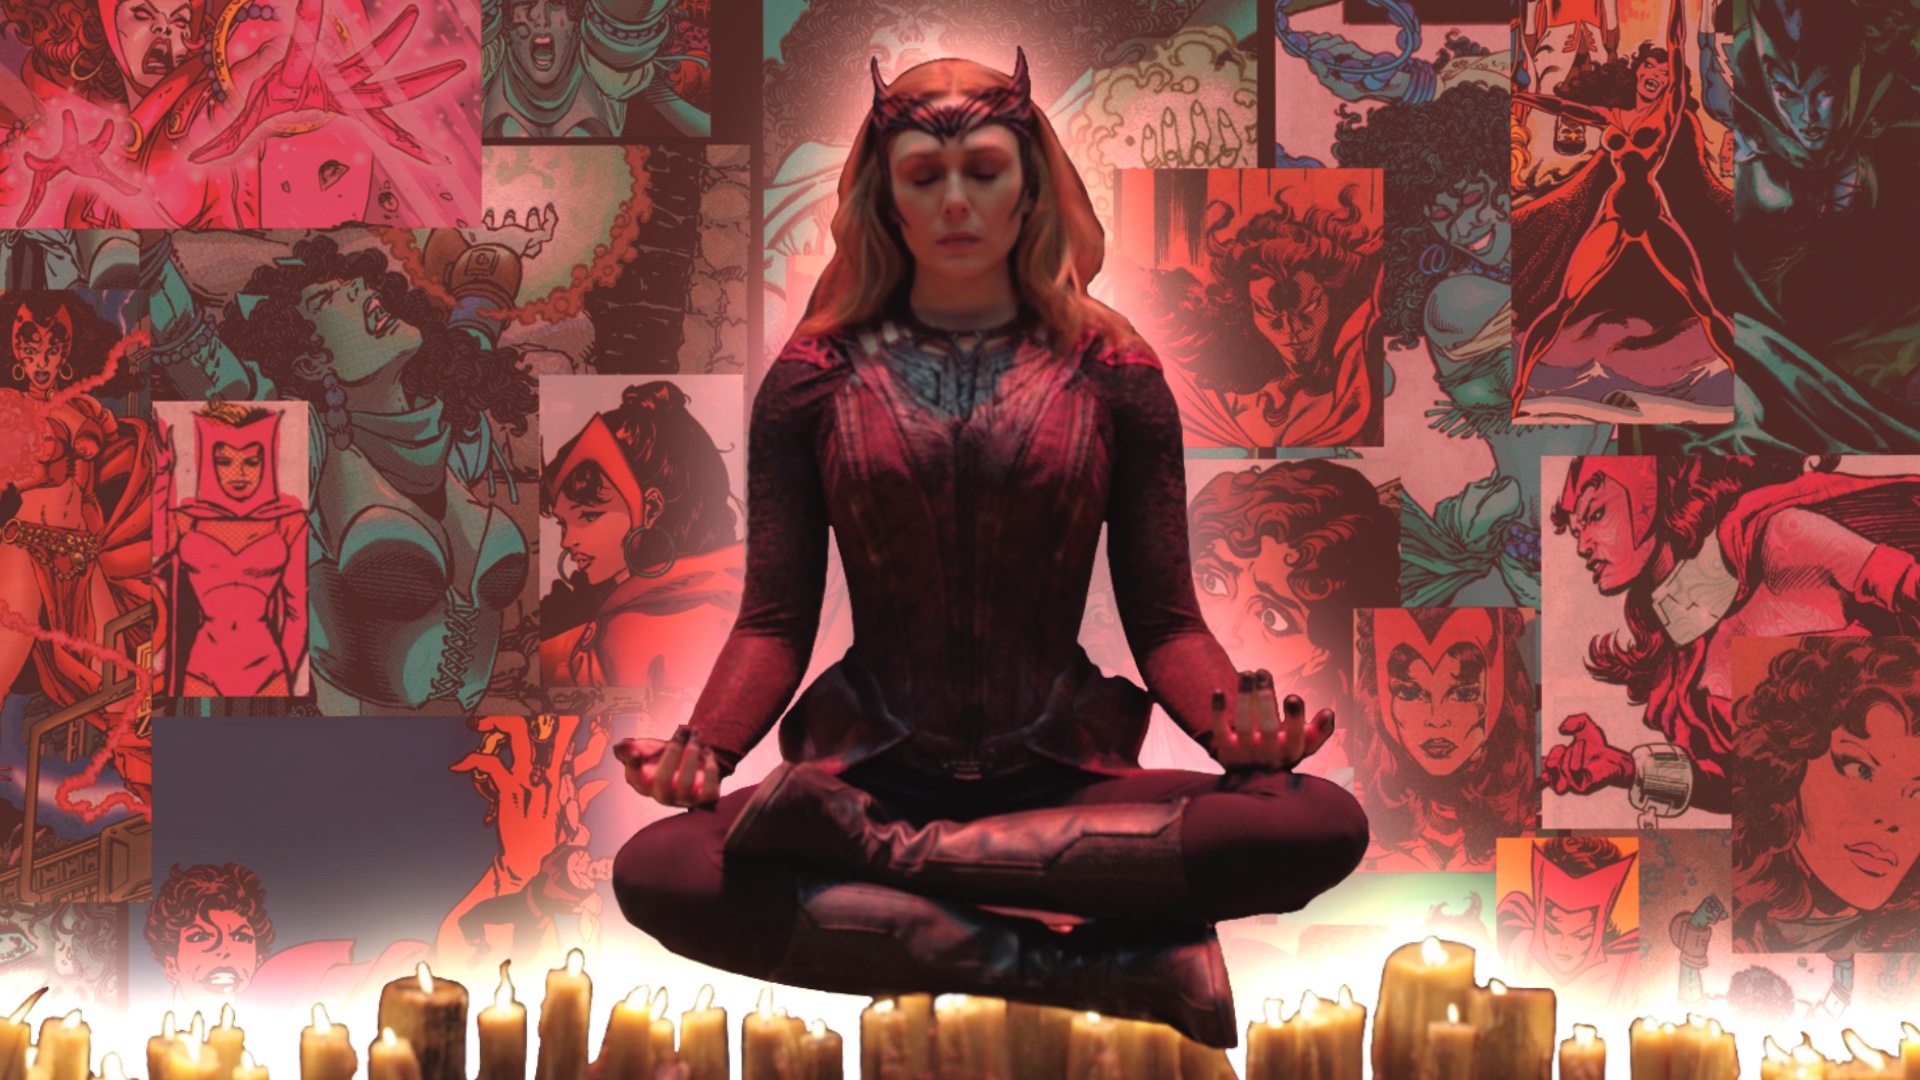 Even Scarlet Witch's Power Level Can't Match Avengers' New Superhuman